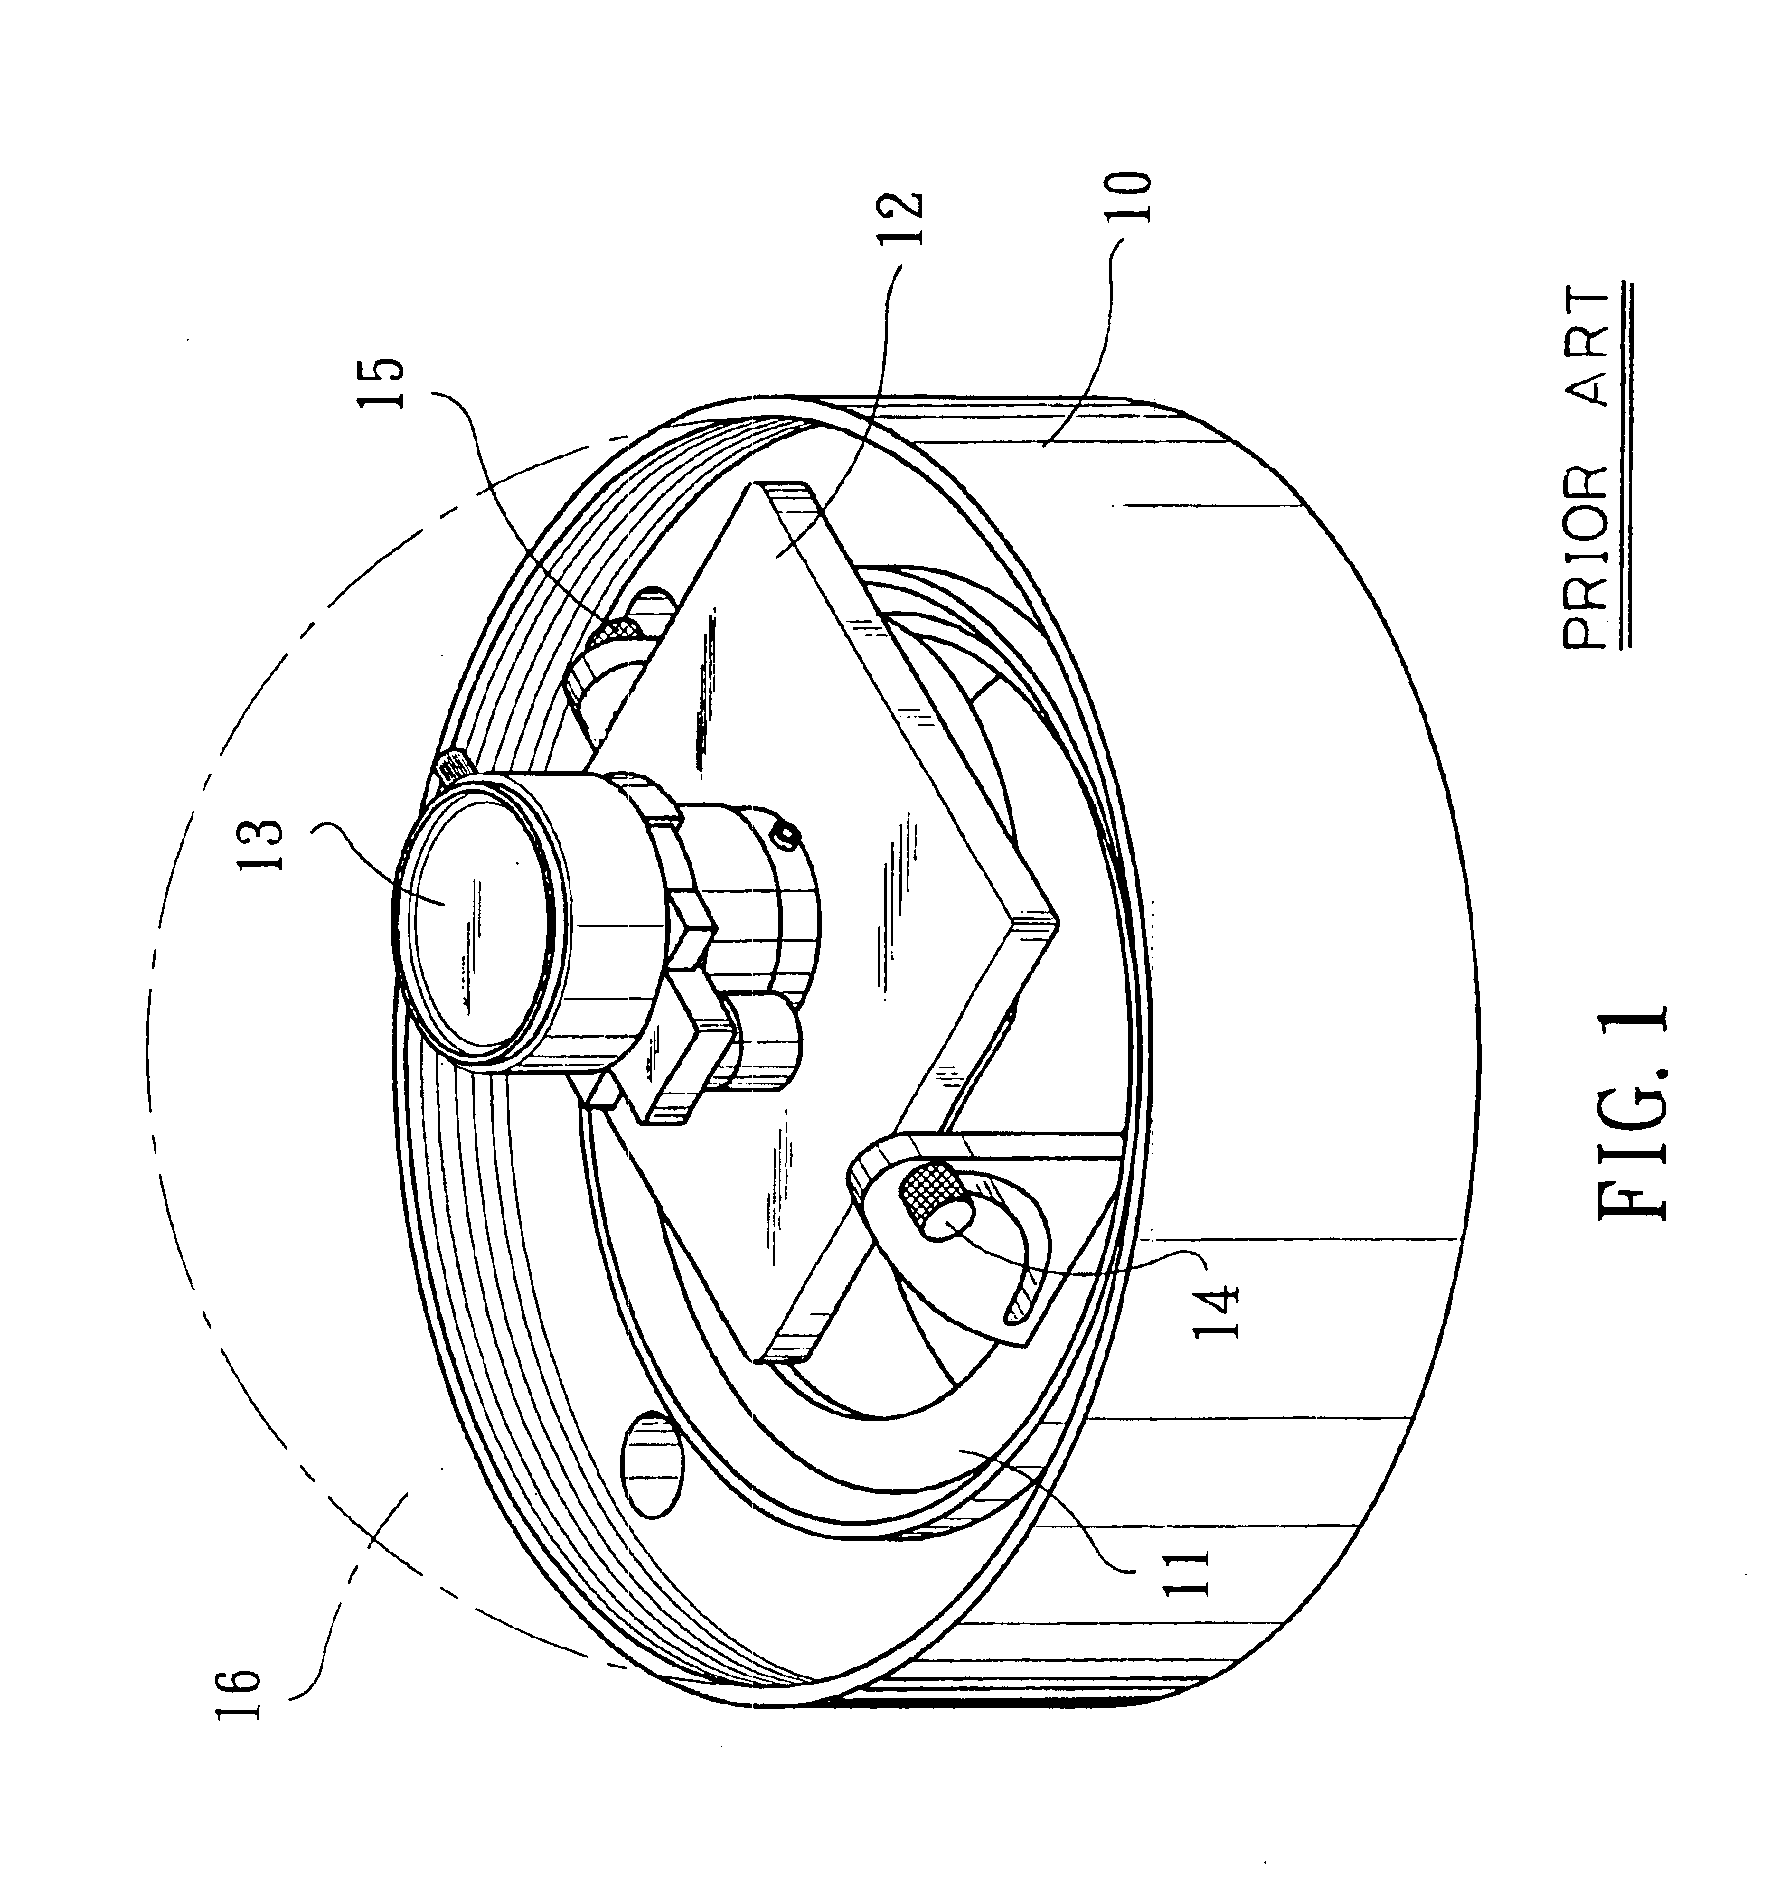 Lens holding structure for wall-mounted surveillance camera